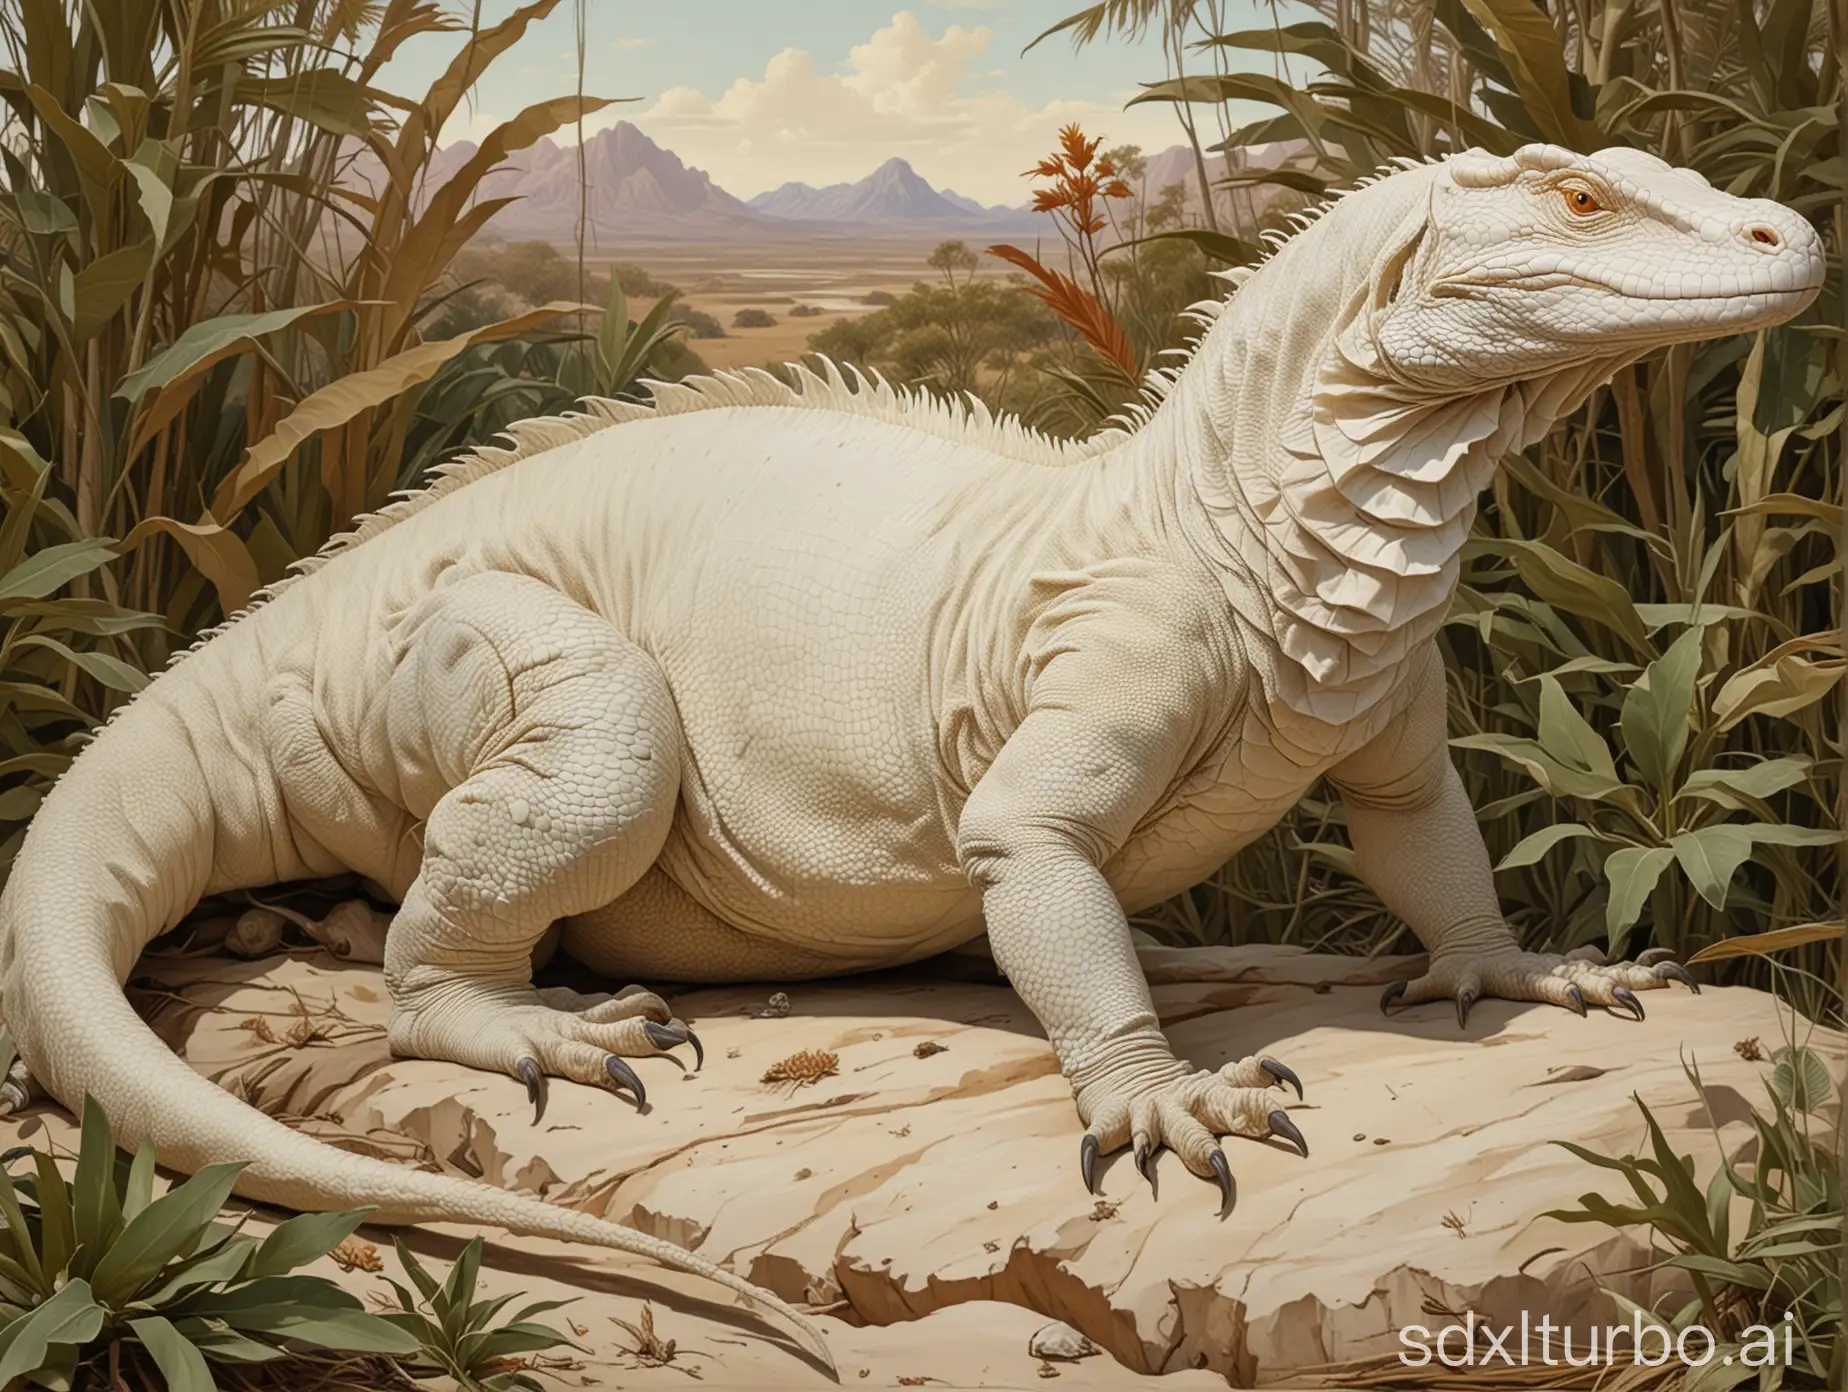 A full body shot of an albino Komodo dragon, with a background of savannah, in the style of painting by Leyendecker.